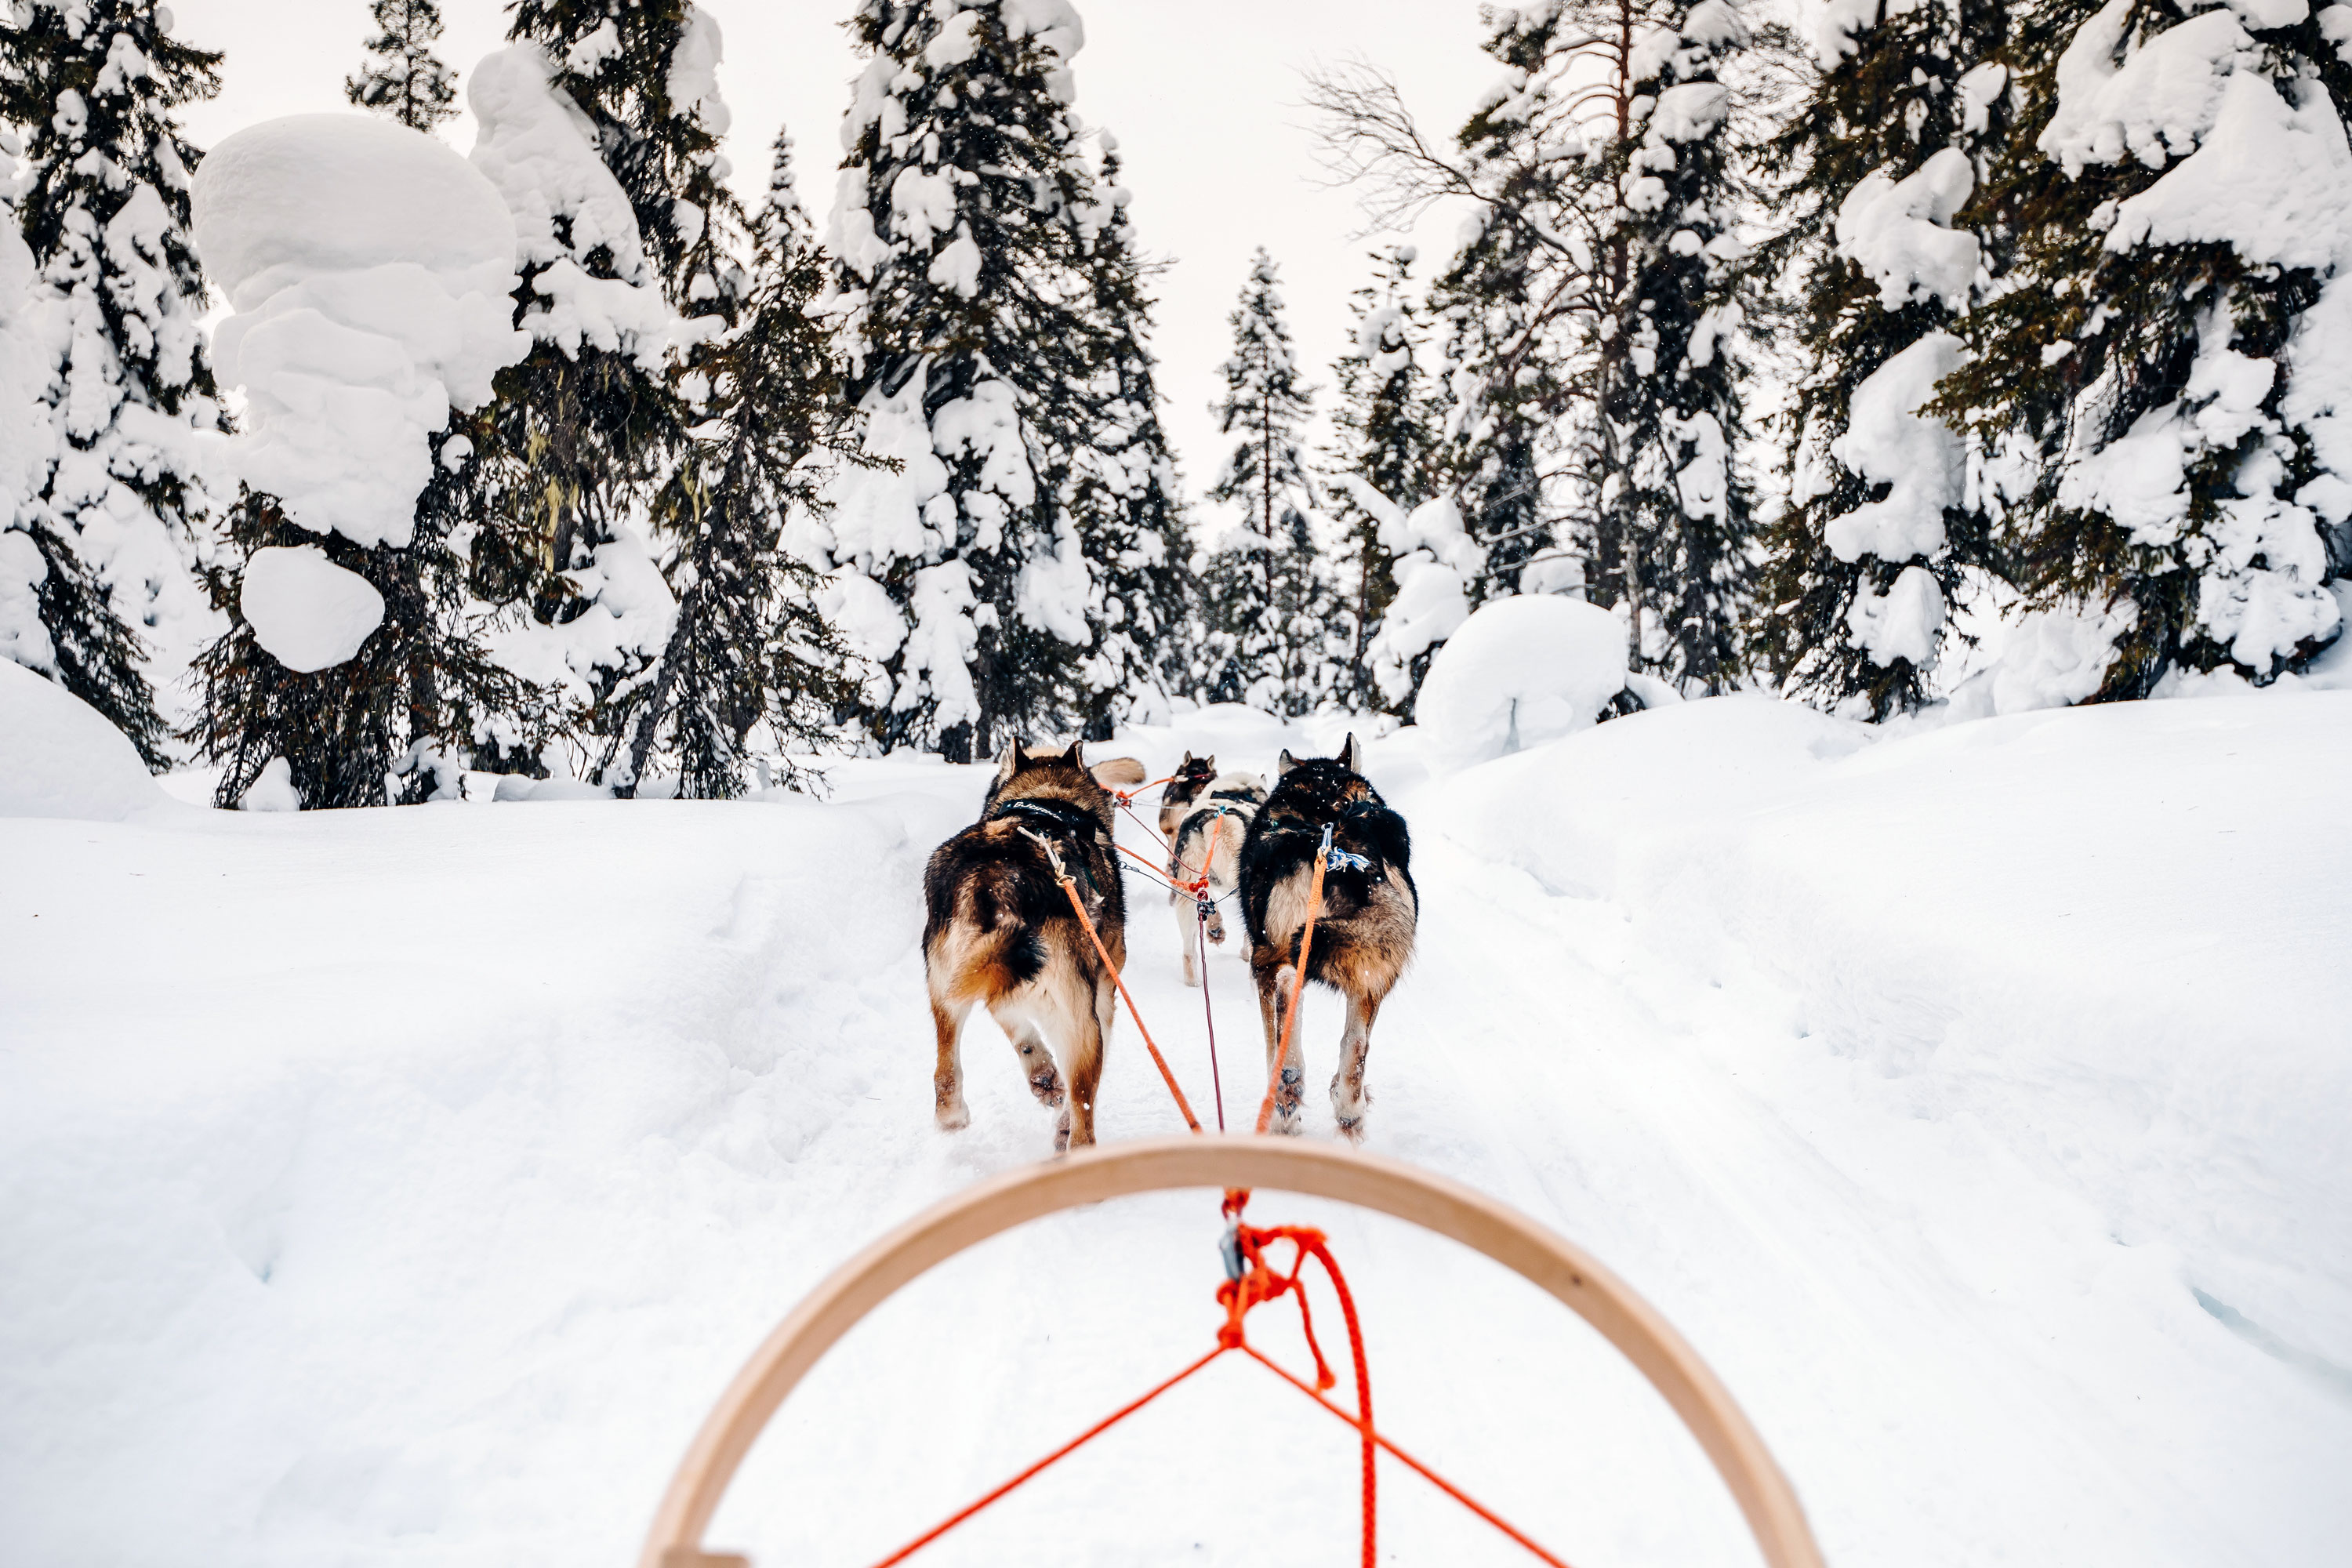 riding-husky-dogs-sledge-snow-winter-forest-finland-lapland.jpg